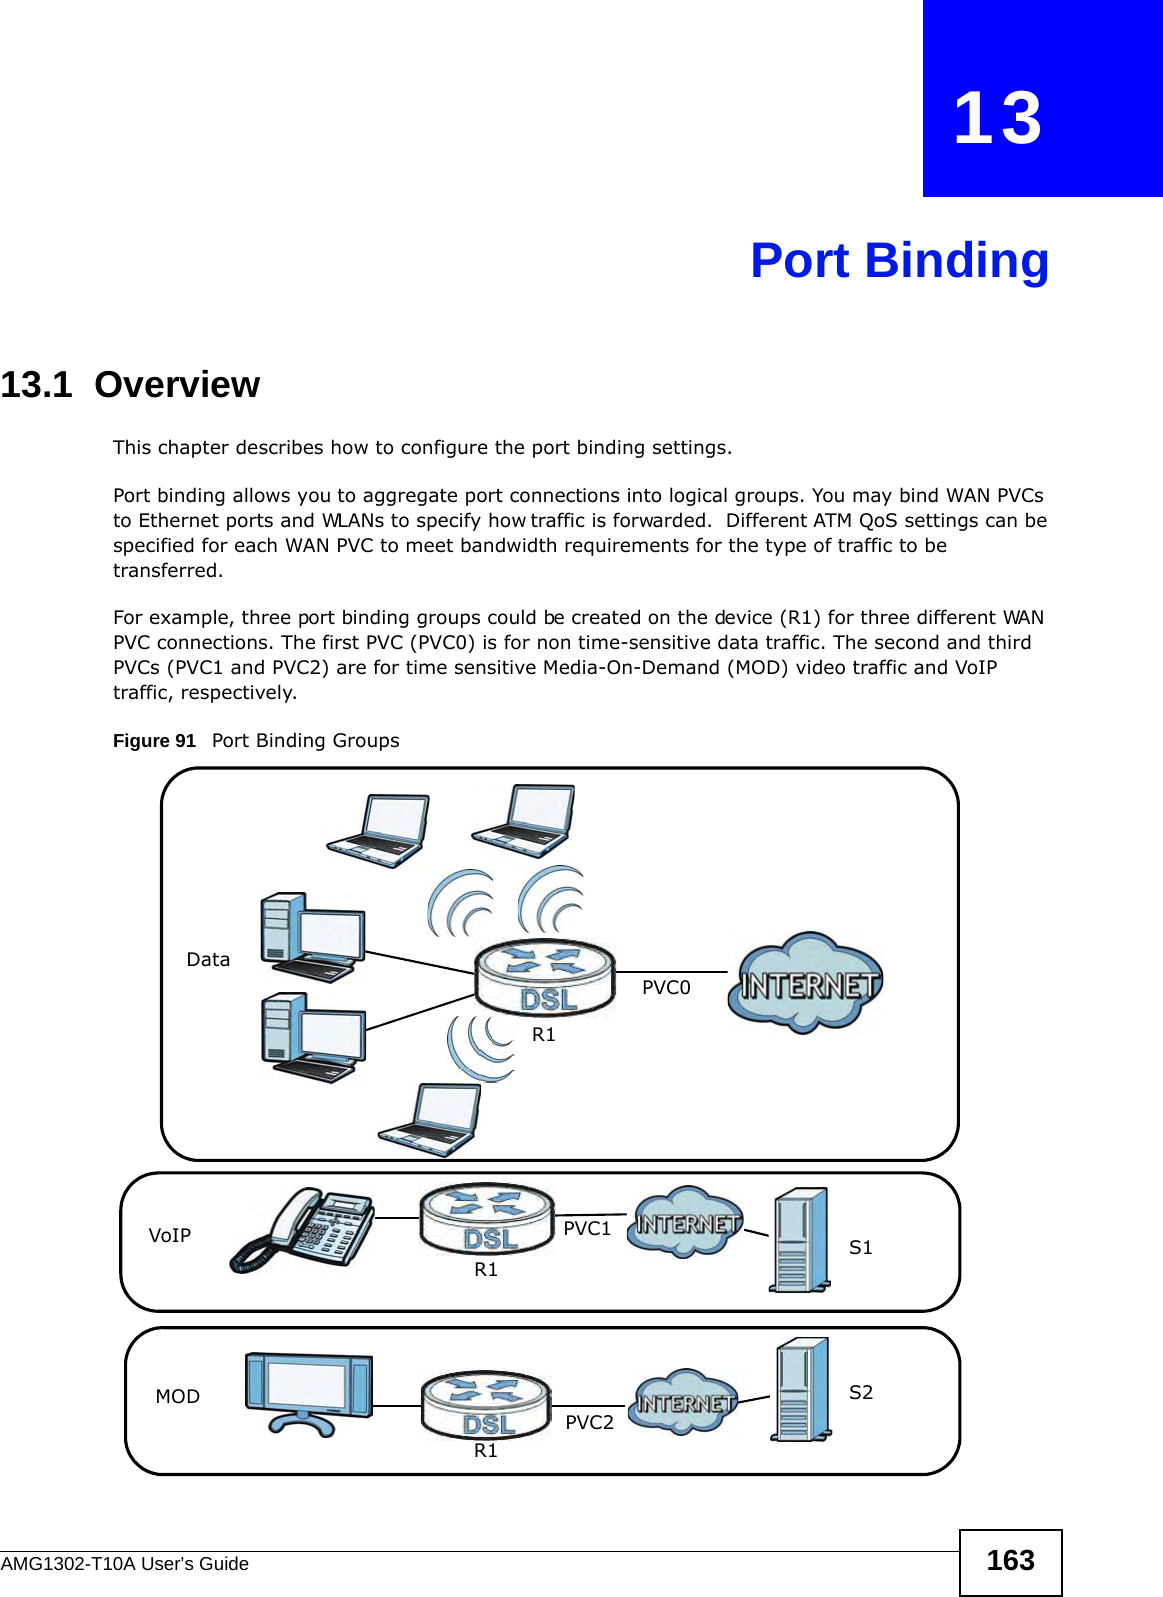 AMG1302-T10A User’s Guide 163CHAPTER   13Port Binding13.1  OverviewThis chapter describes how to configure the port binding settings.Port binding allows you to aggregate port connections into logical groups. You may bind WAN PVCs to Ethernet ports and WLANs to specify how traffic is forwarded.  Different ATM QoS settings can be specified for each WAN PVC to meet bandwidth requirements for the type of traffic to be transferred.    For example, three port binding groups could be created on the device (R1) for three different WAN PVC connections. The first PVC (PVC0) is for non time-sensitive data traffic. The second and third PVCs (PVC1 and PVC2) are for time sensitive Media-On-Demand (MOD) video traffic and VoIP traffic, respectively.   Figure 91   Port Binding GroupsS2S1R1R1R1MODVoIPDataPVC0PVC2PVC1